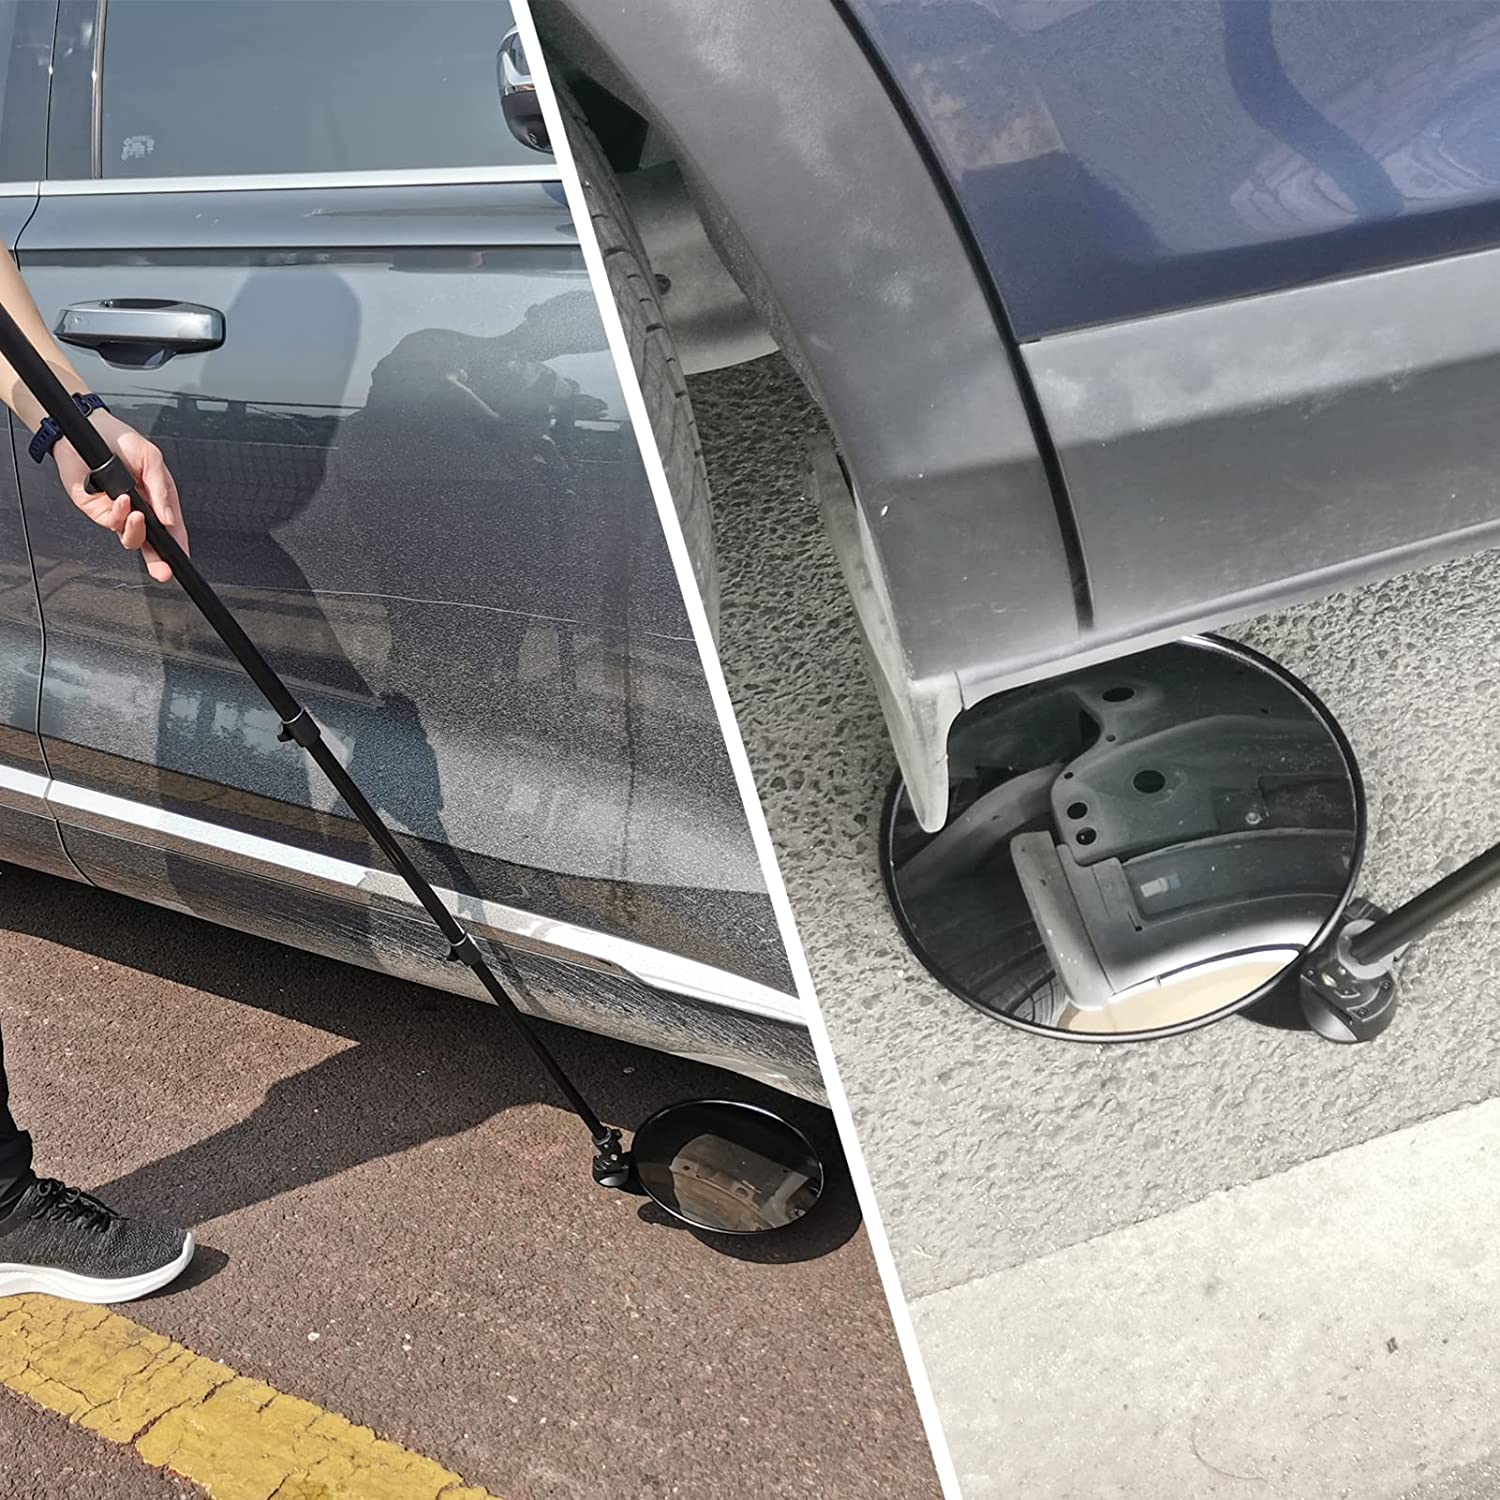 Under Vehicle Inspection Mirror - Securely Examine Vehicles & Objects Below Ground Level | Supply Master | Accra, Ghana Buy Tools hardware Building materials